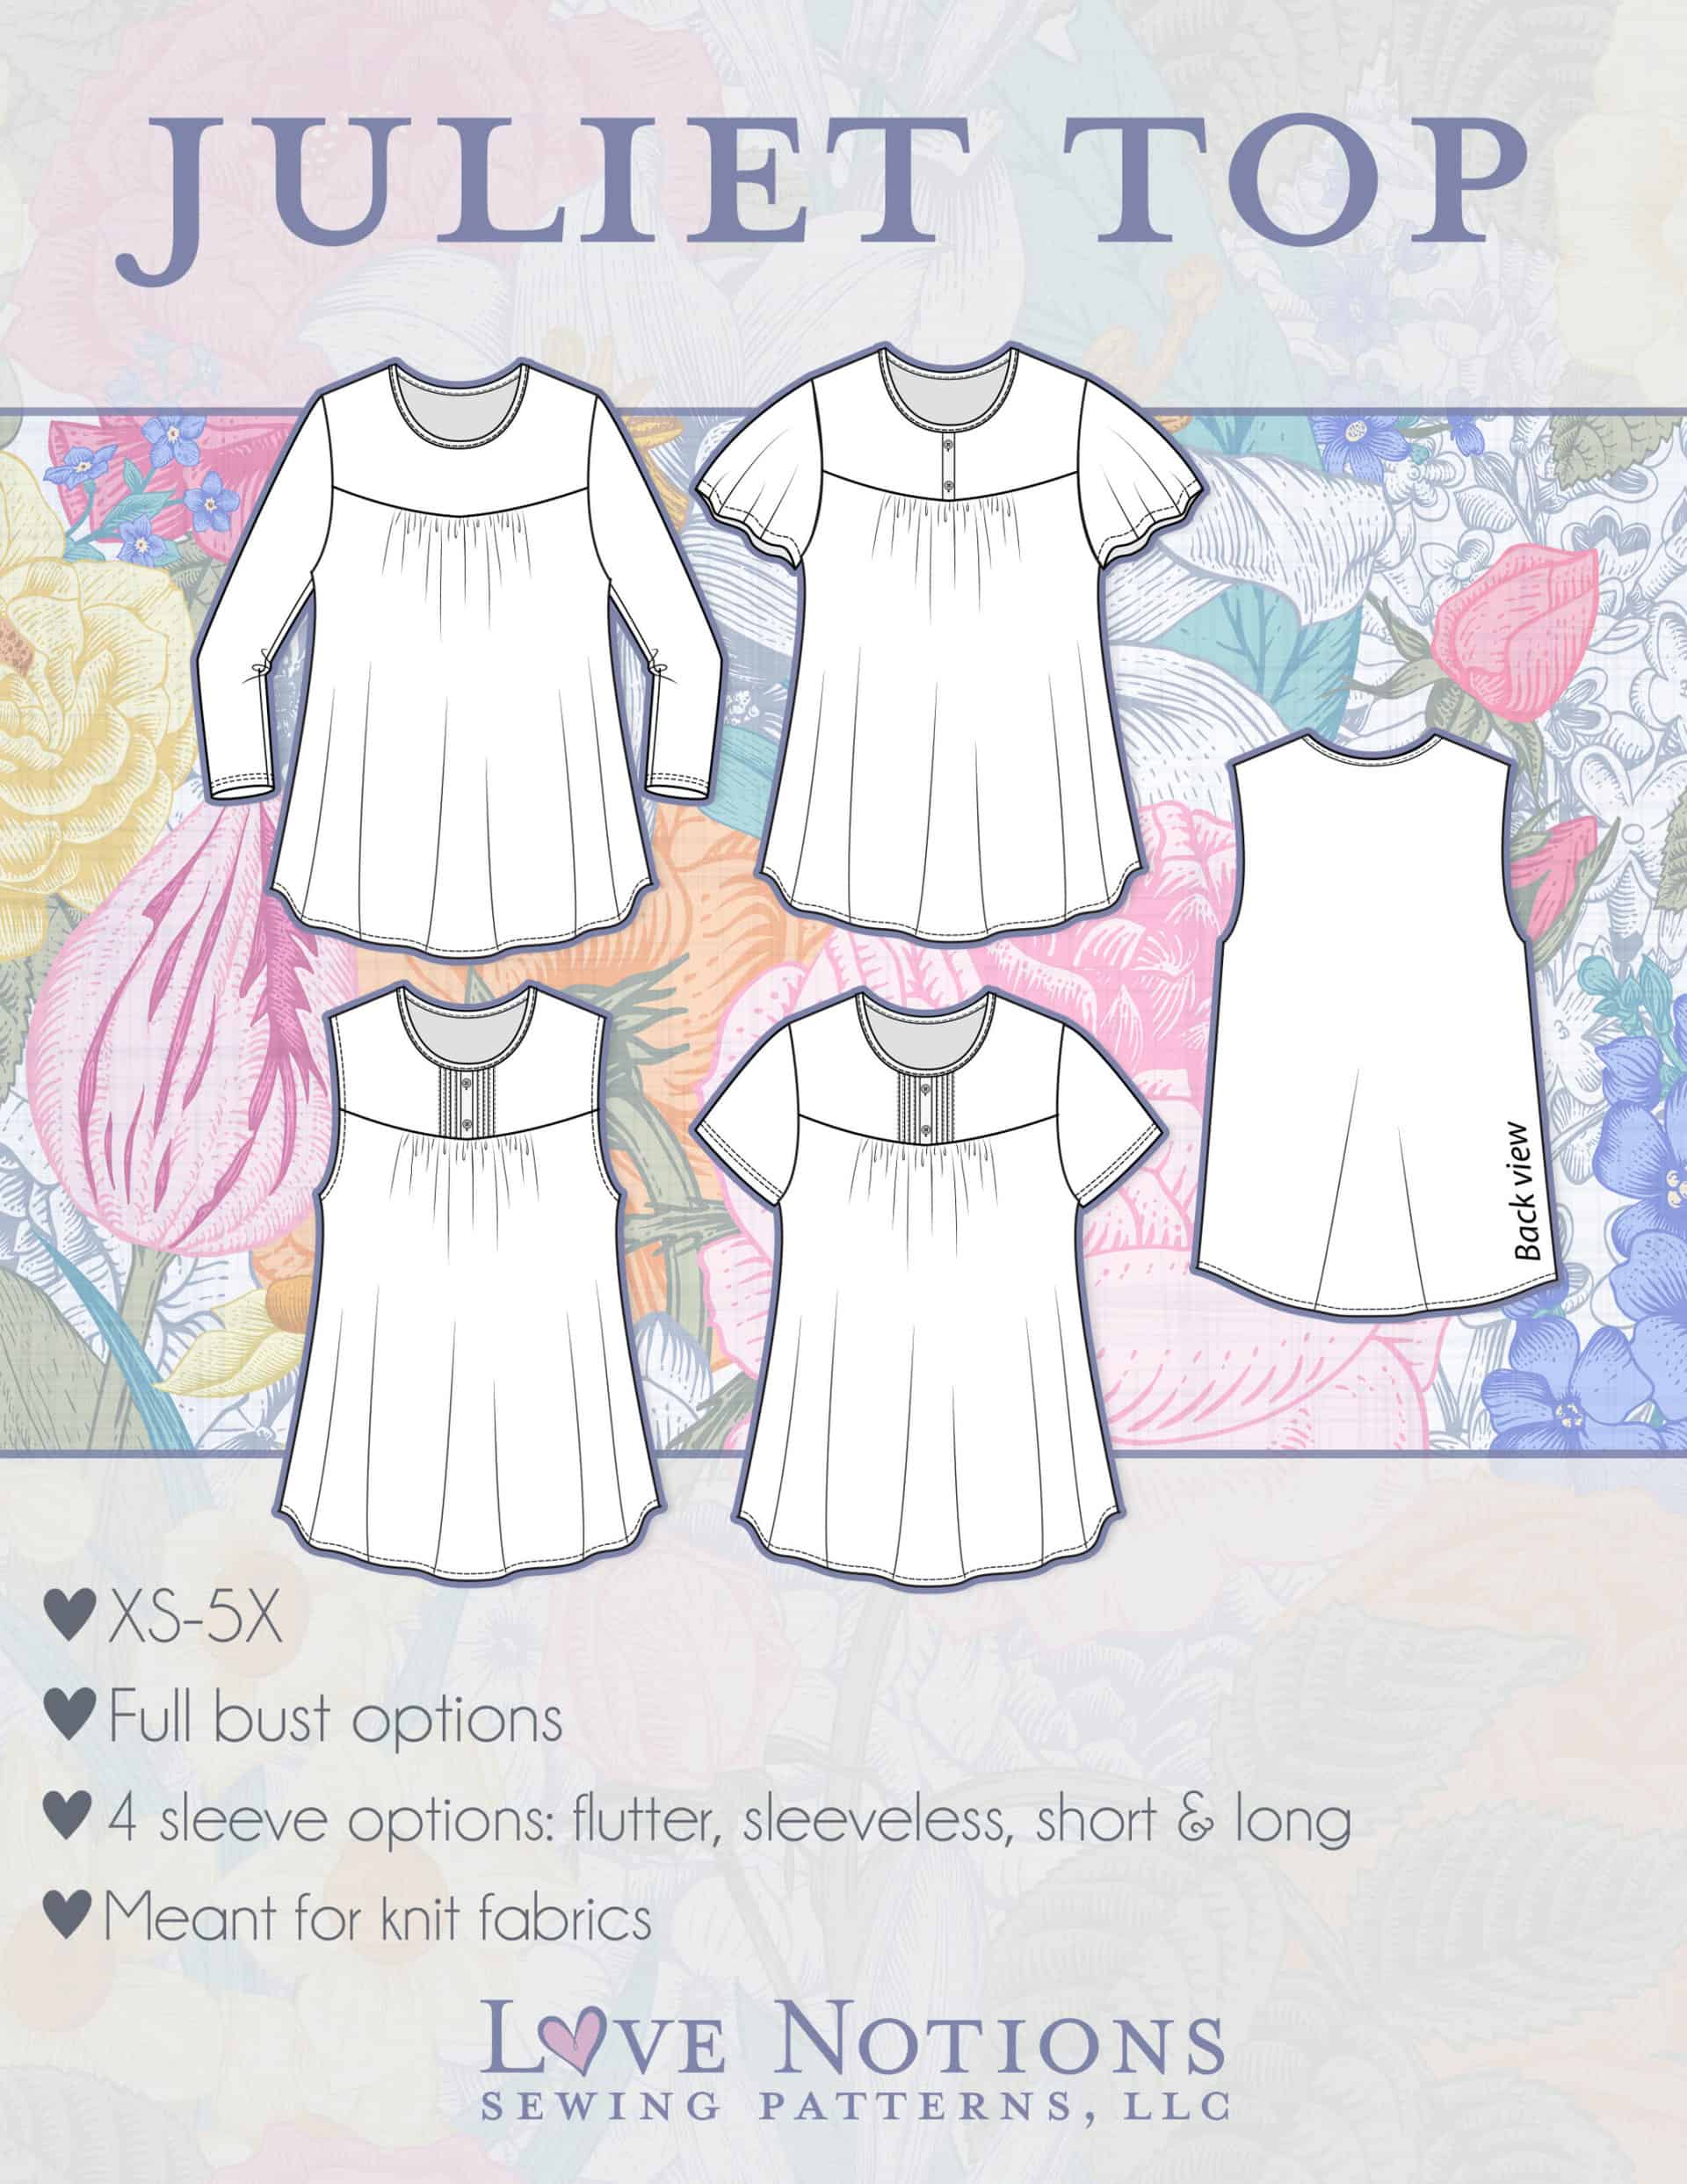 Juliet Top - Love Notions Sewing Patterns